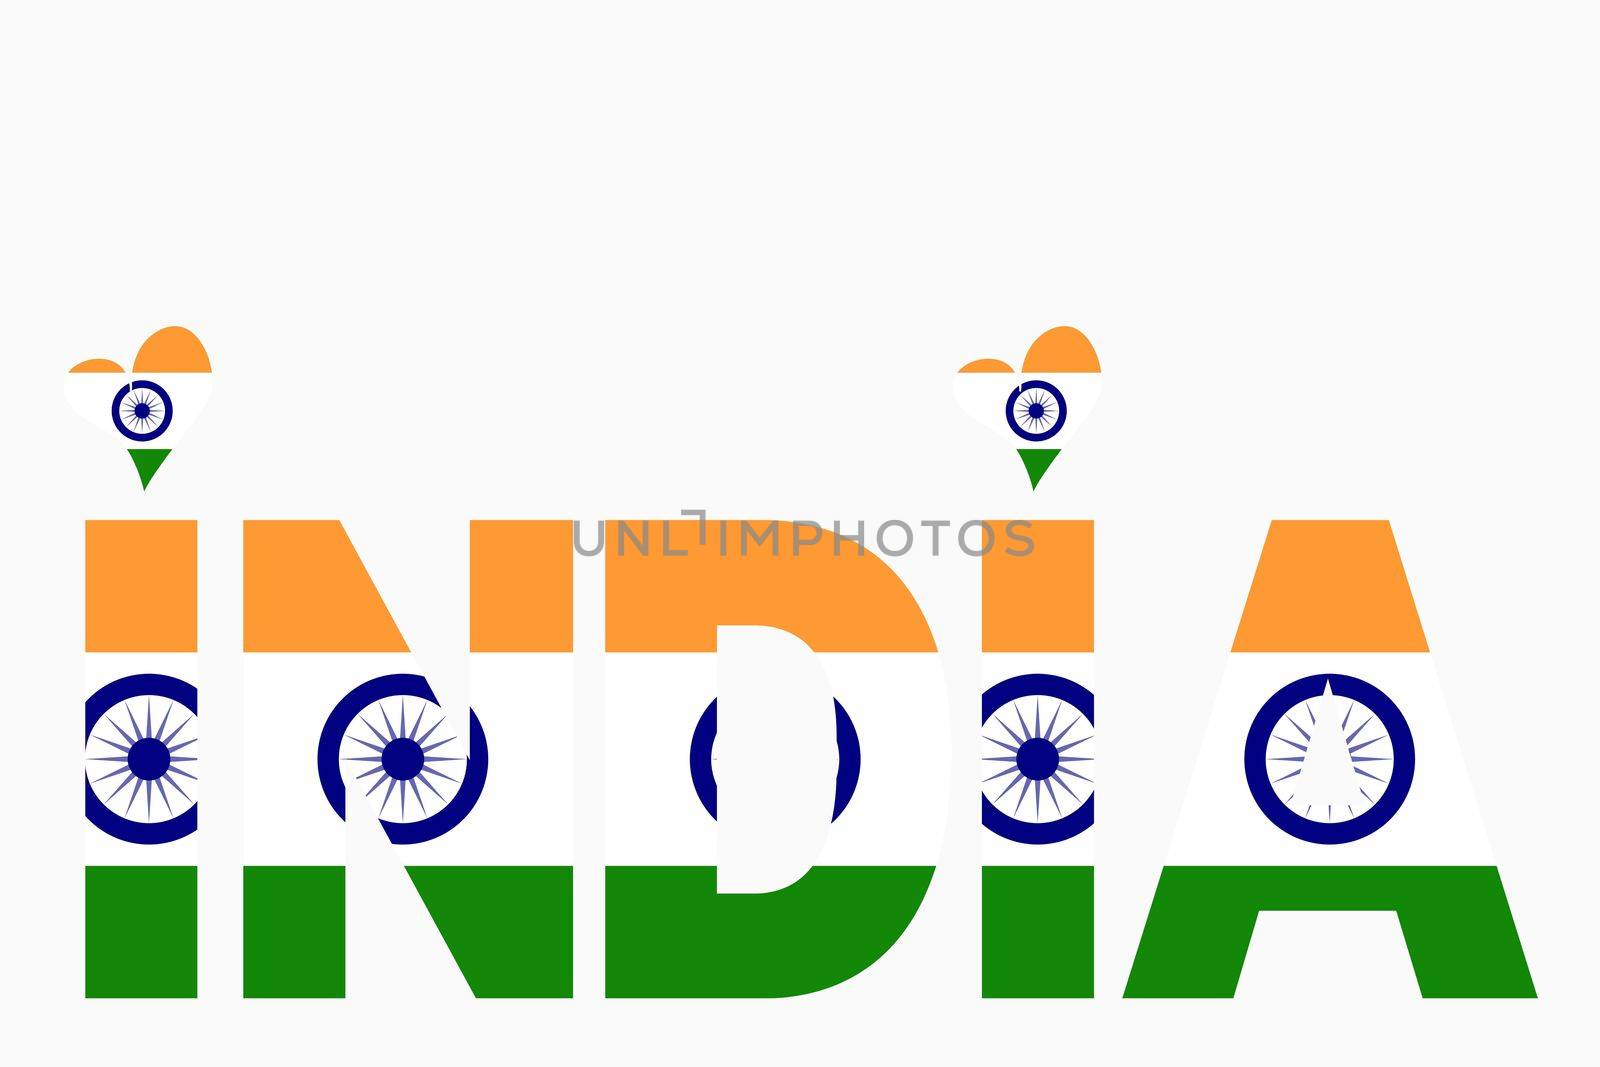 Illustration of India written with Indian National Flag colors. Tiranga (3 colors - Saffron White and Green) with the navy blue wheel Ashok Chakra